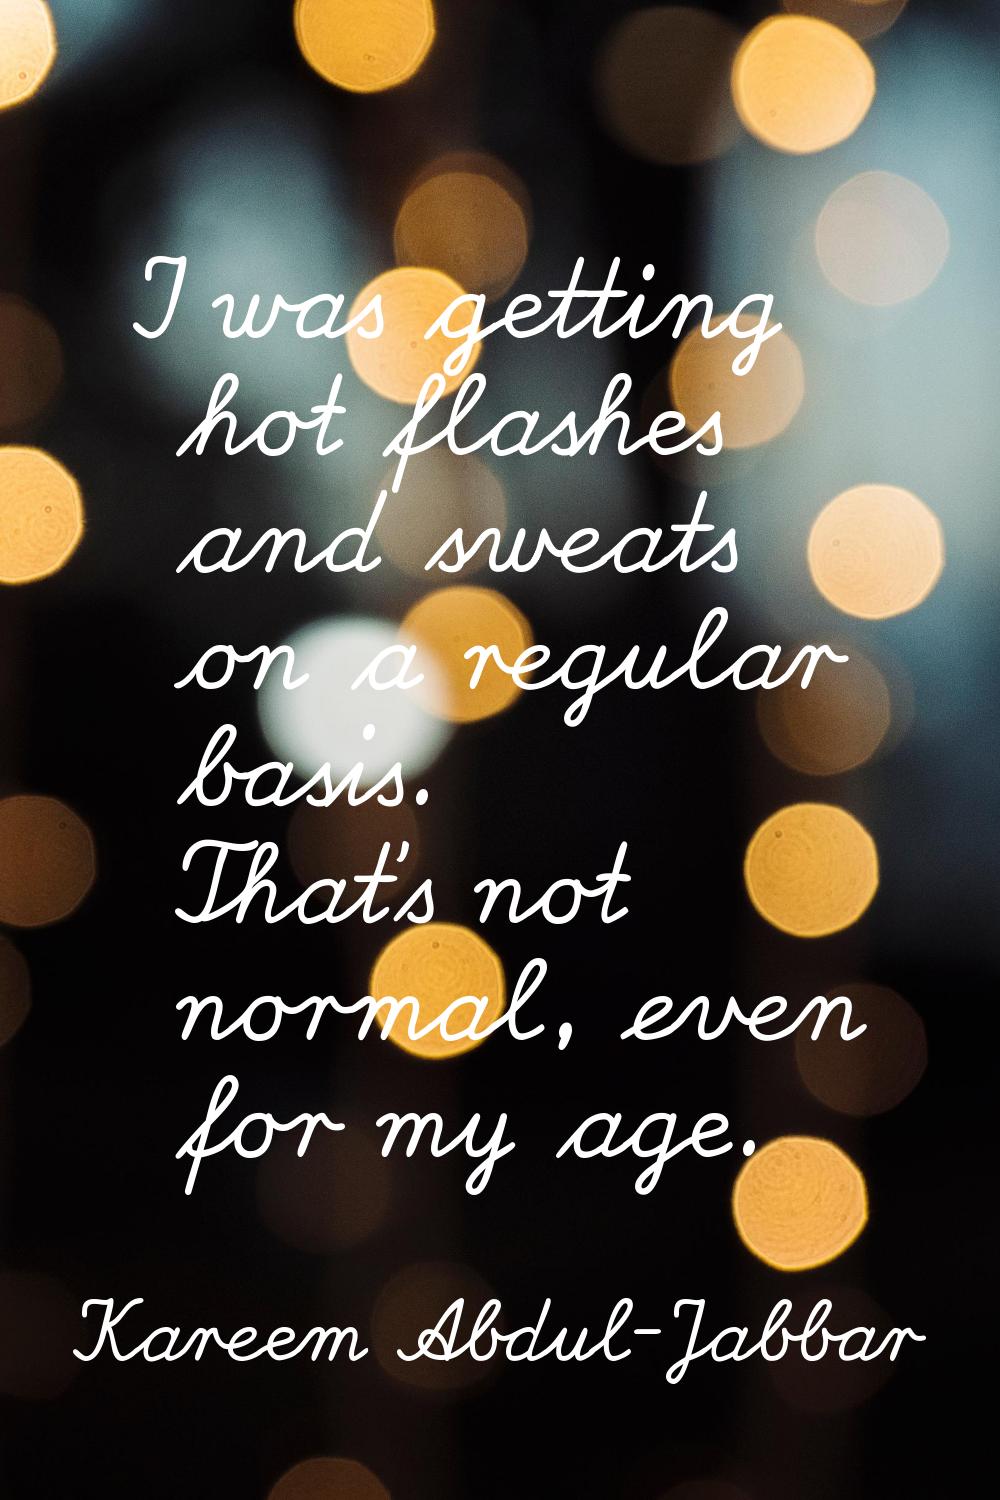 I was getting hot flashes and sweats on a regular basis. That's not normal, even for my age.